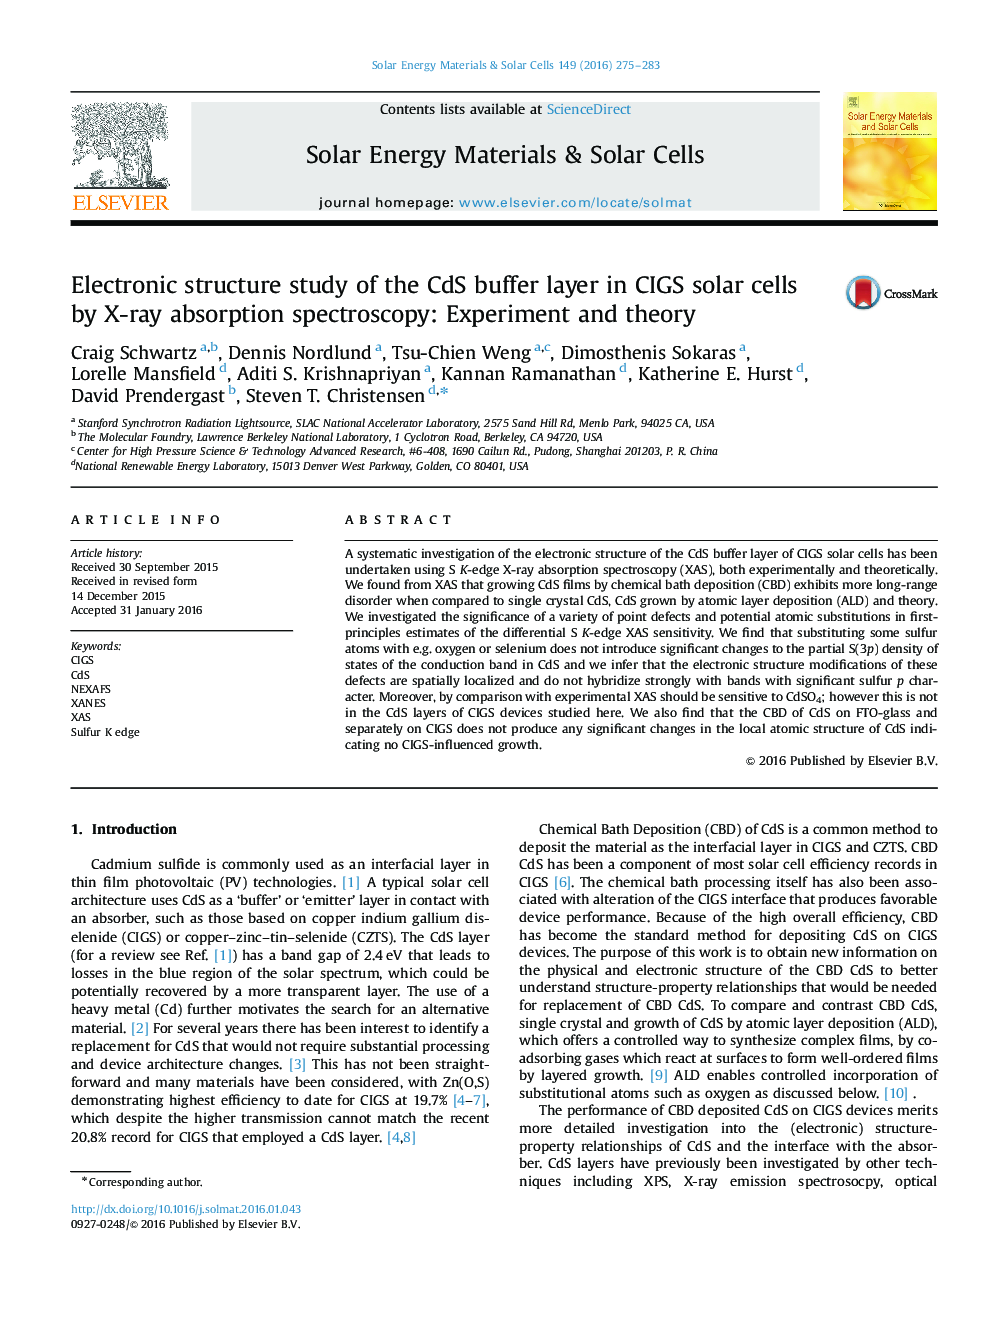 Electronic structure study of the CdS buffer layer in CIGS solar cells by X-ray absorption spectroscopy: Experiment and theory